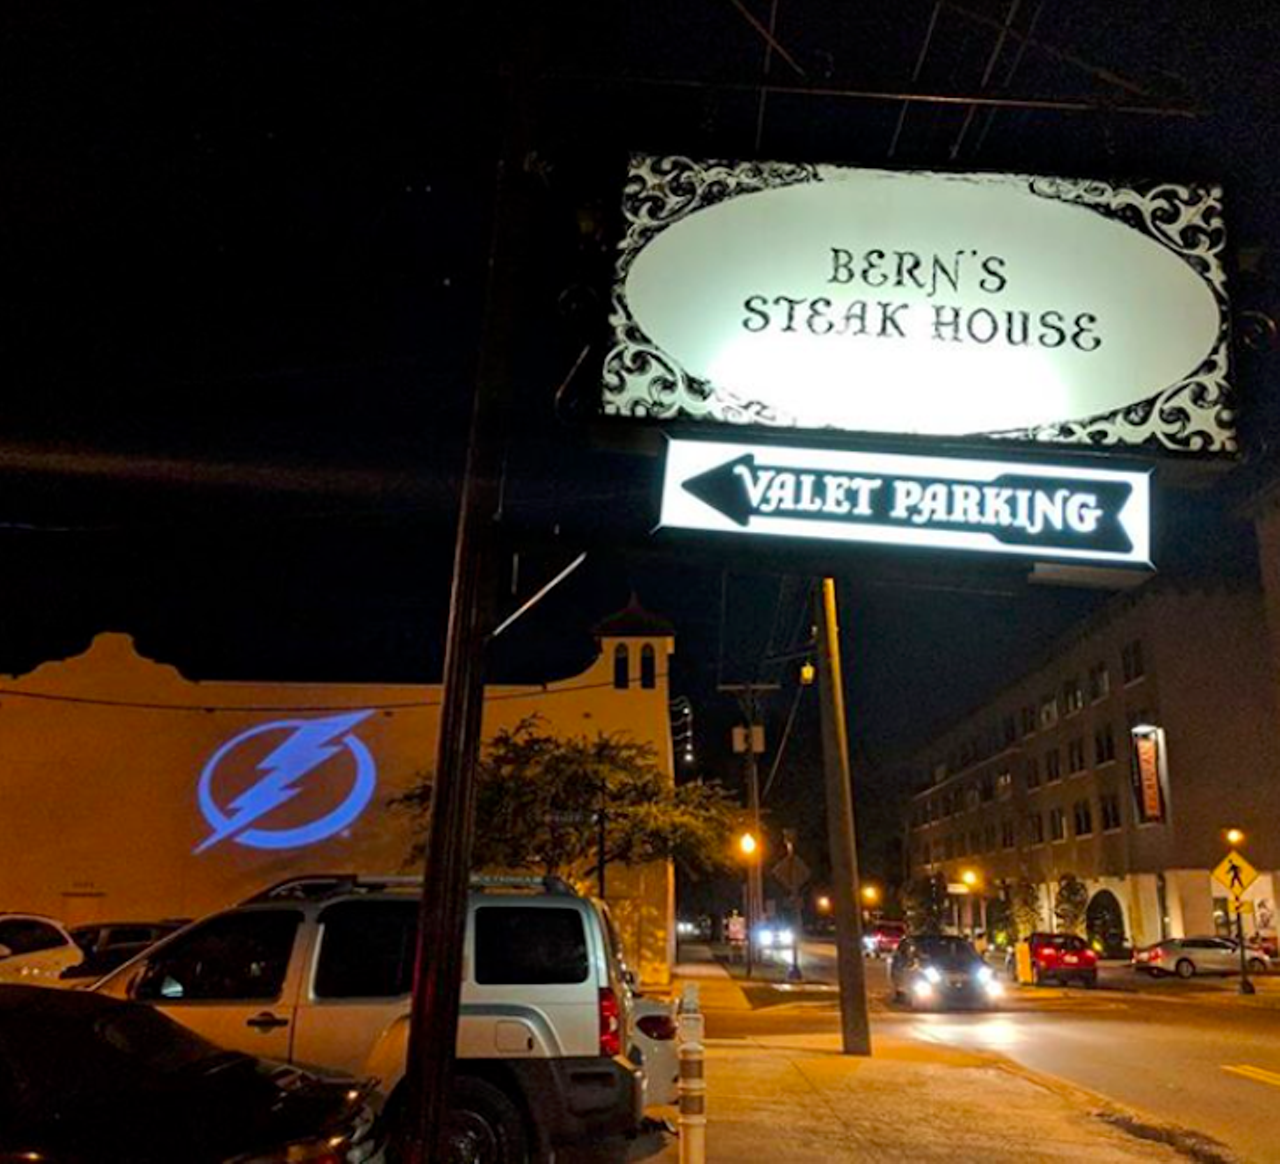 Bern's Steak House  
1208 S. Howard Ave., Tampa, 813-251-2424 
Booked out for days and weeks at a time. These steaks are worth the wait. Servers weave in and out like ghosts refilling glasses and swapping silverware.
Photo via Bern's/Facebook